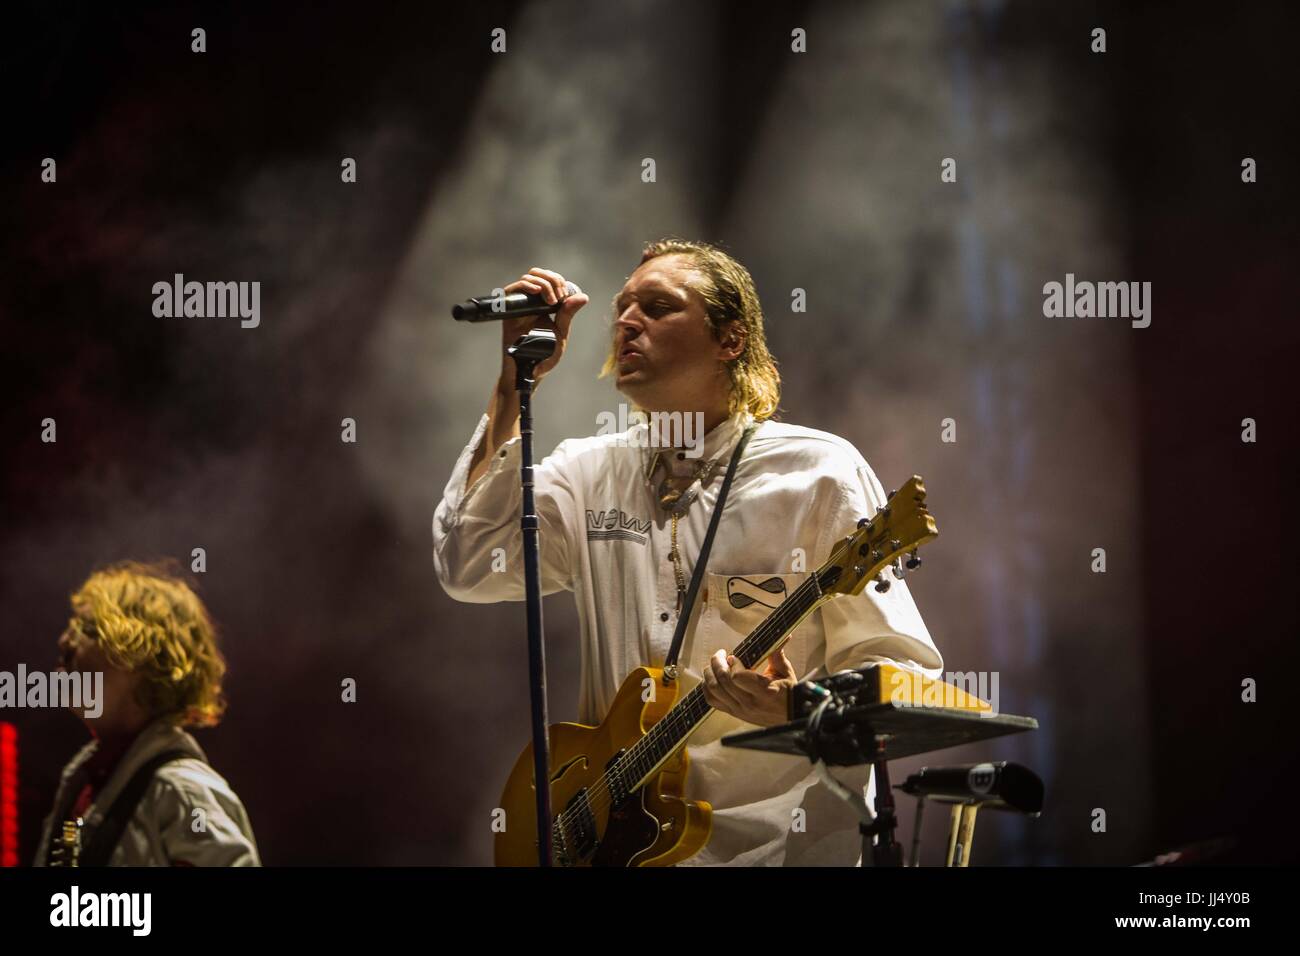 Milan, Italy. 17th July, 2017. Win Butler of the canadian indie rock band Arcade Fire pictured on stage as they perform at Milano Summer Festival, Ippodromo San Siro Milan. Credit: Roberto Finizio/Pacific Press/Alamy Live News Stock Photo